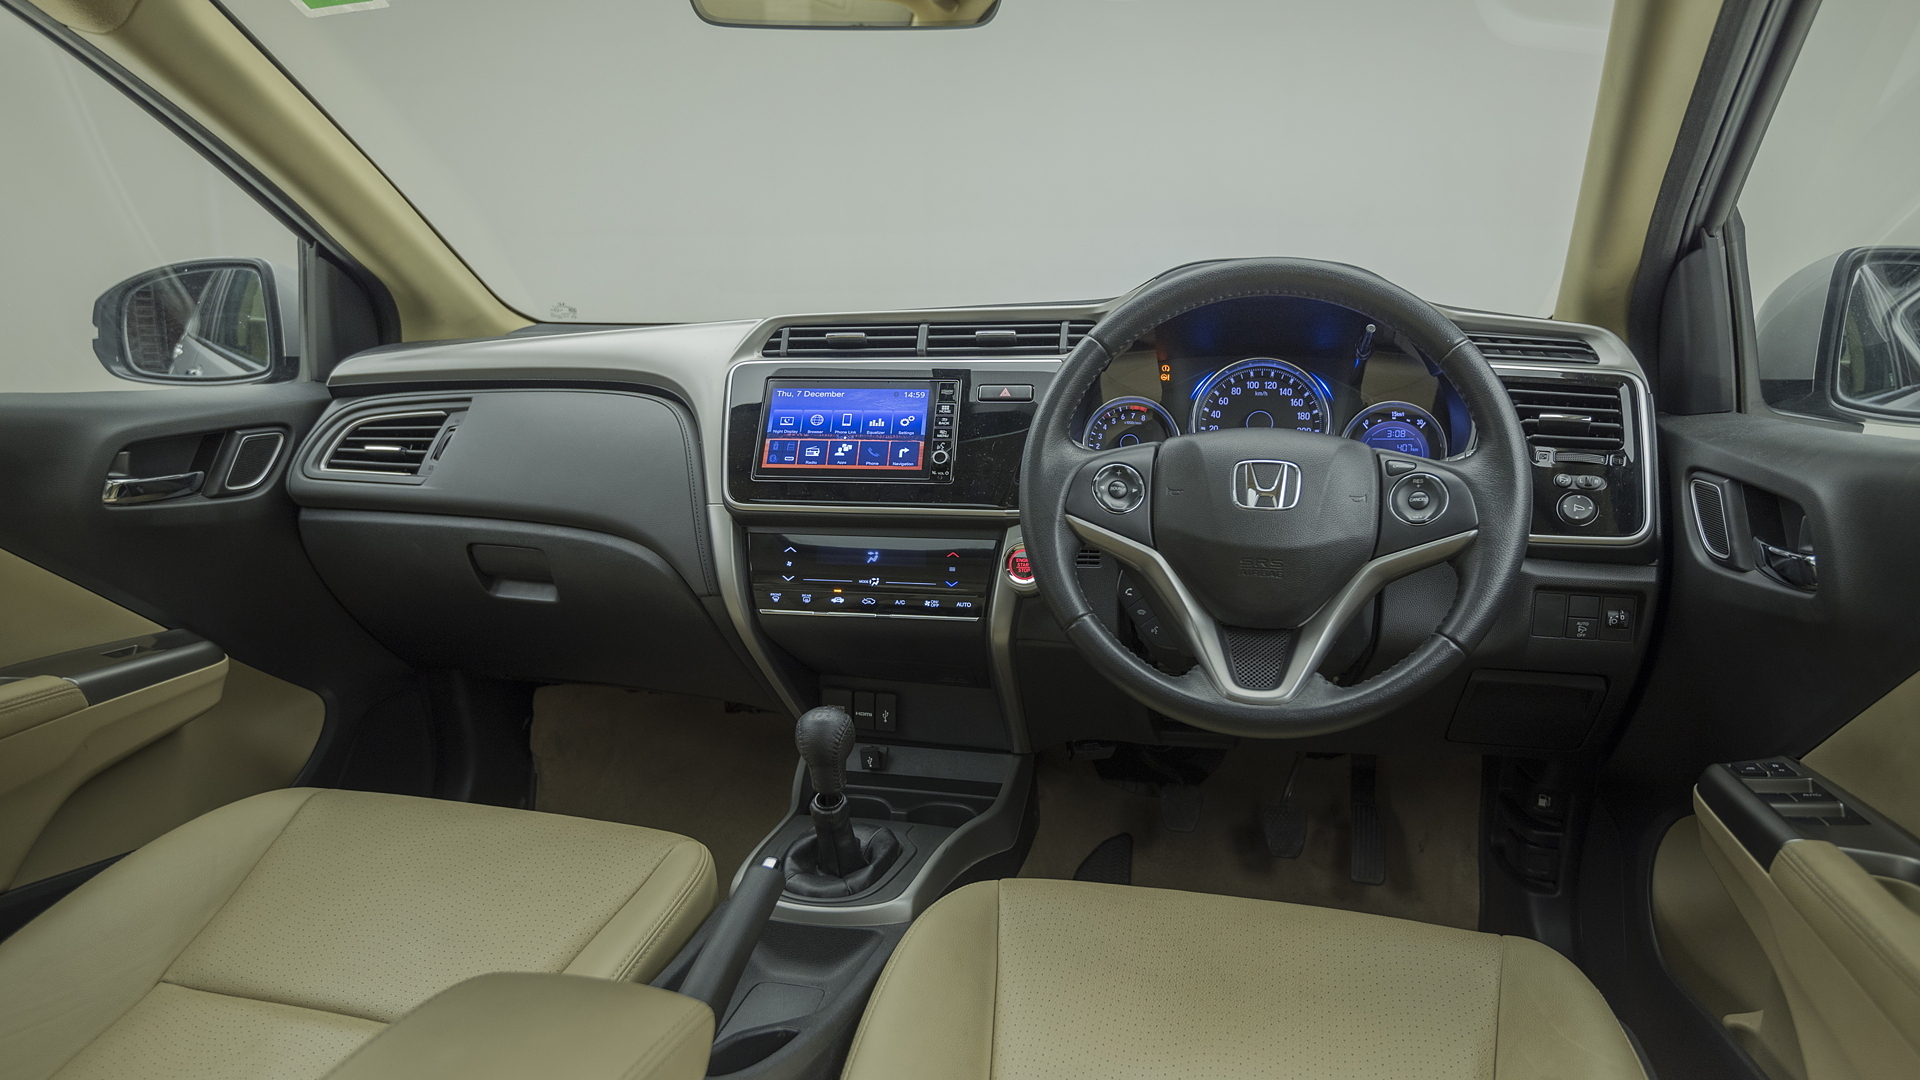 Honda City Images Interior Exterior Photo Gallery Carwale